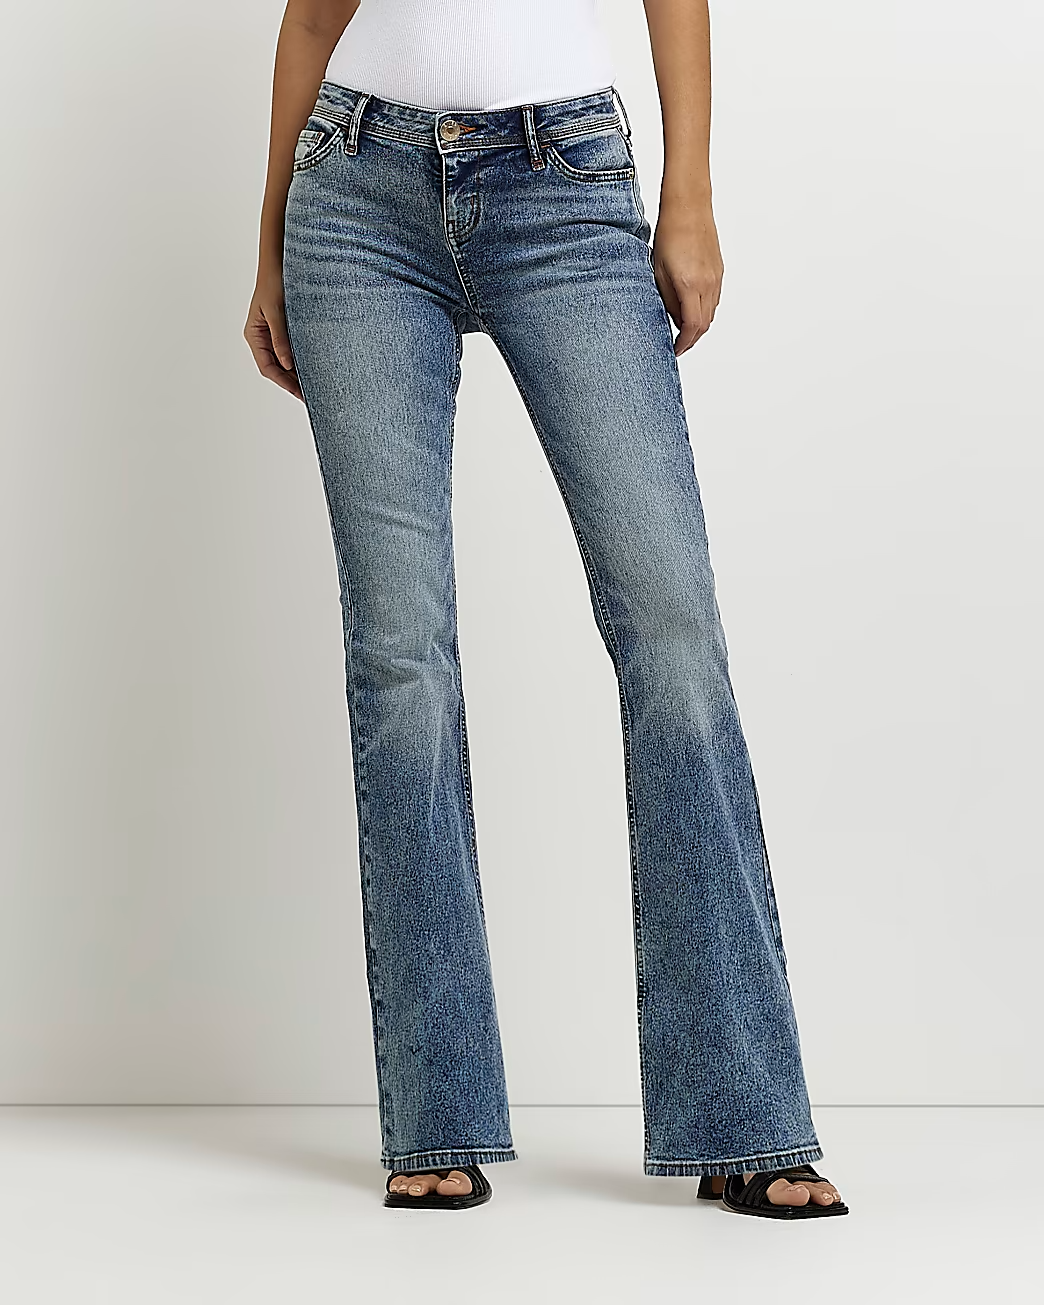 Perfect Jeans for Every Shape - Find Yours!